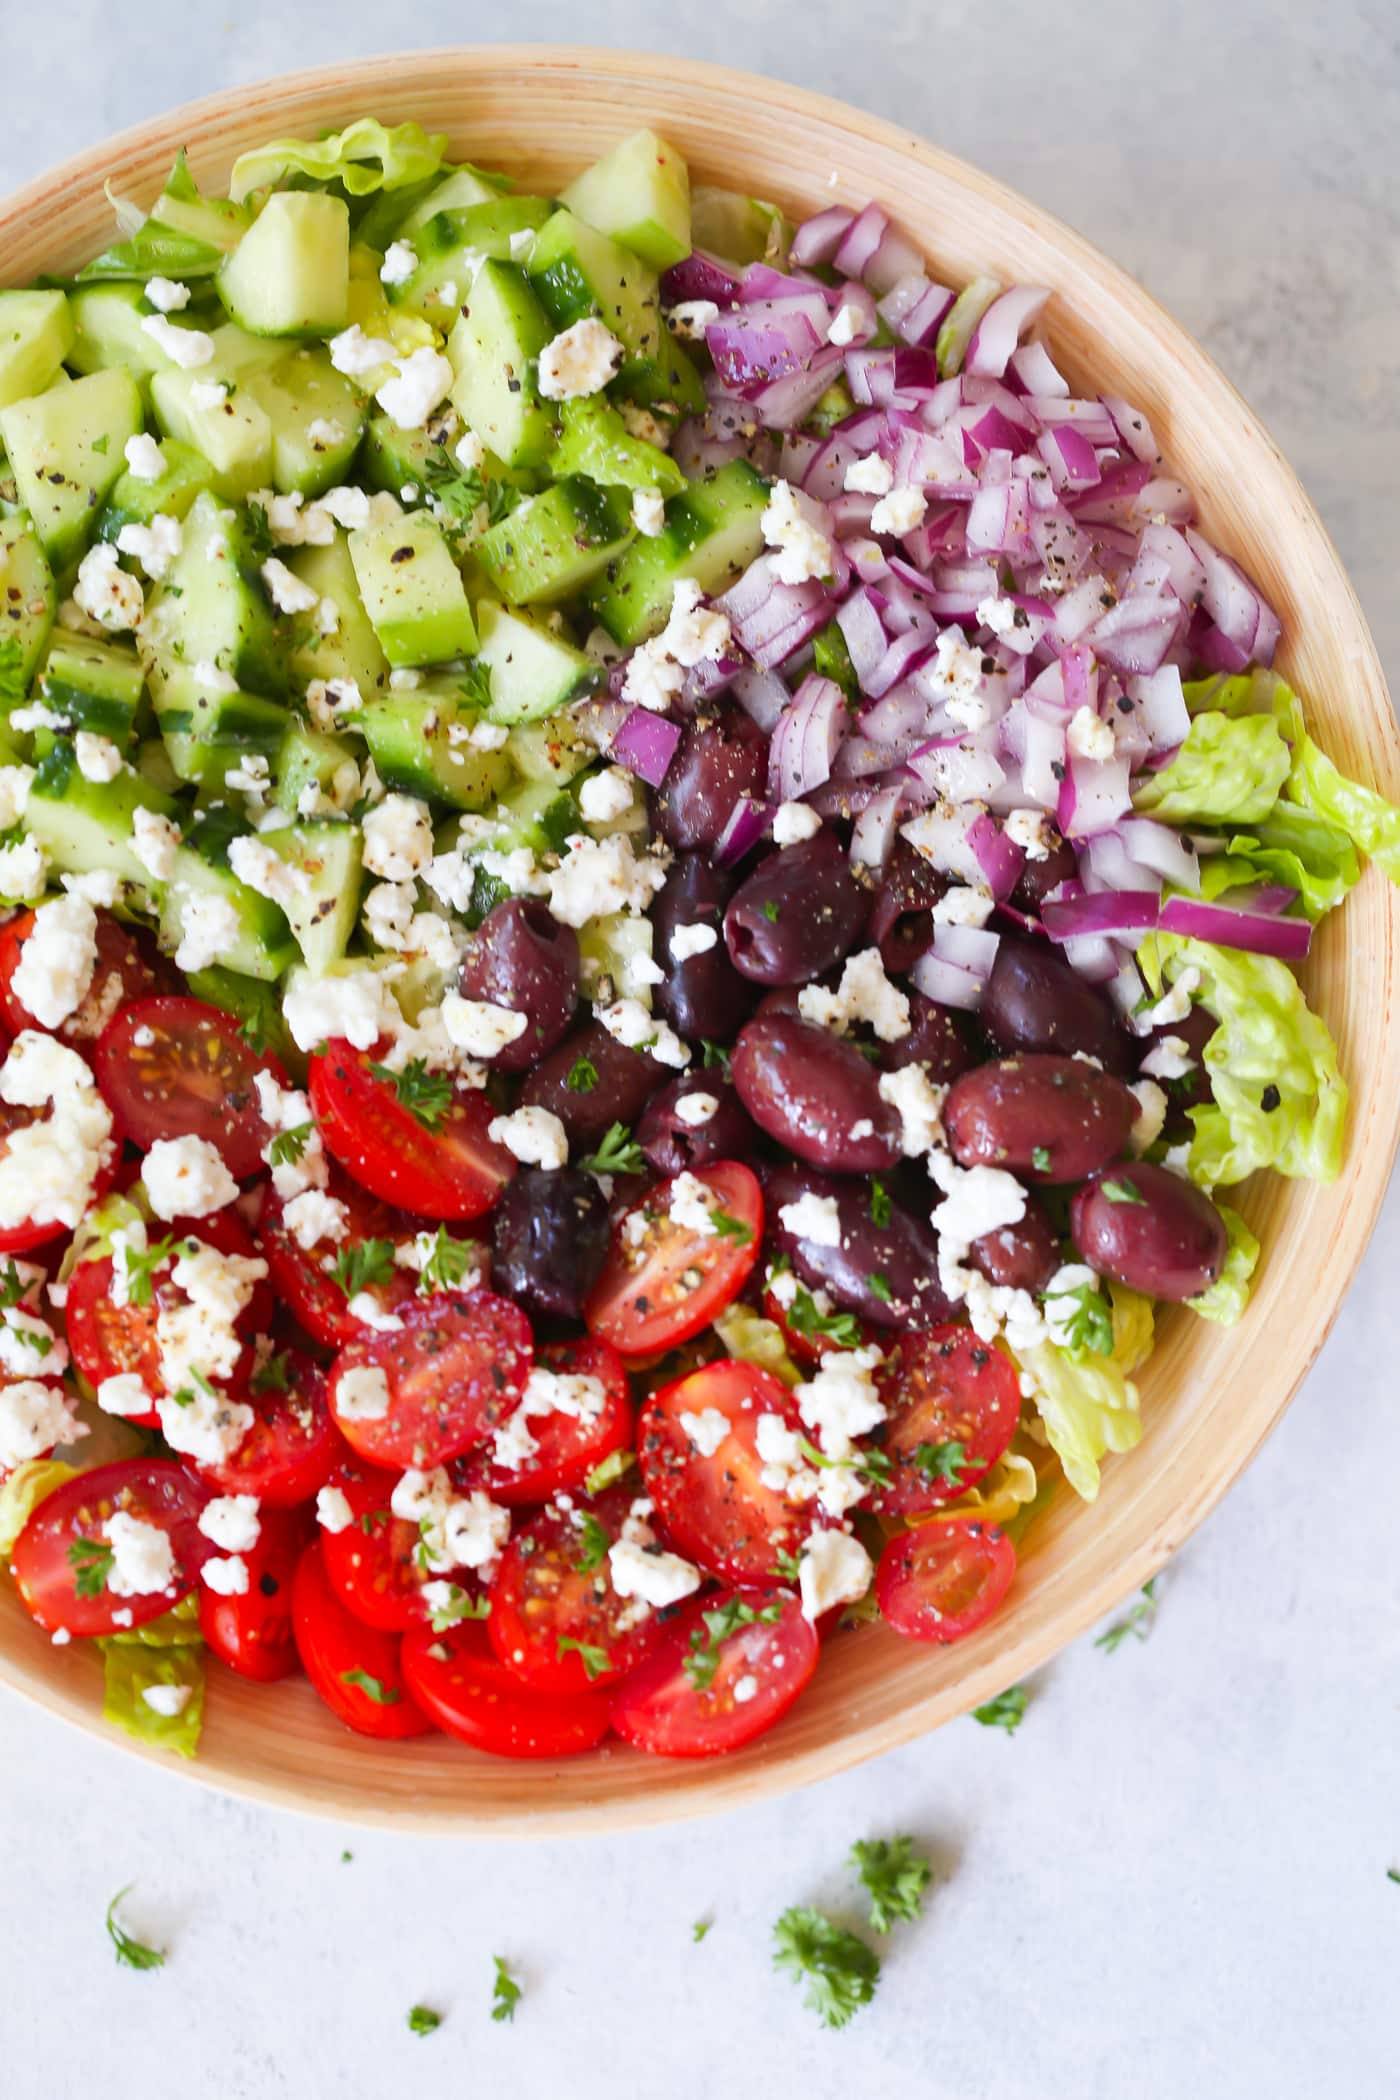 Easy Mediterranean Chopped Salad - Enjoy this Easy Mediterranean Chopped Salad made with red onions, black olives, lettuces, cucumber, cherry tomatoes, feta cheese and light lemon dressing! 